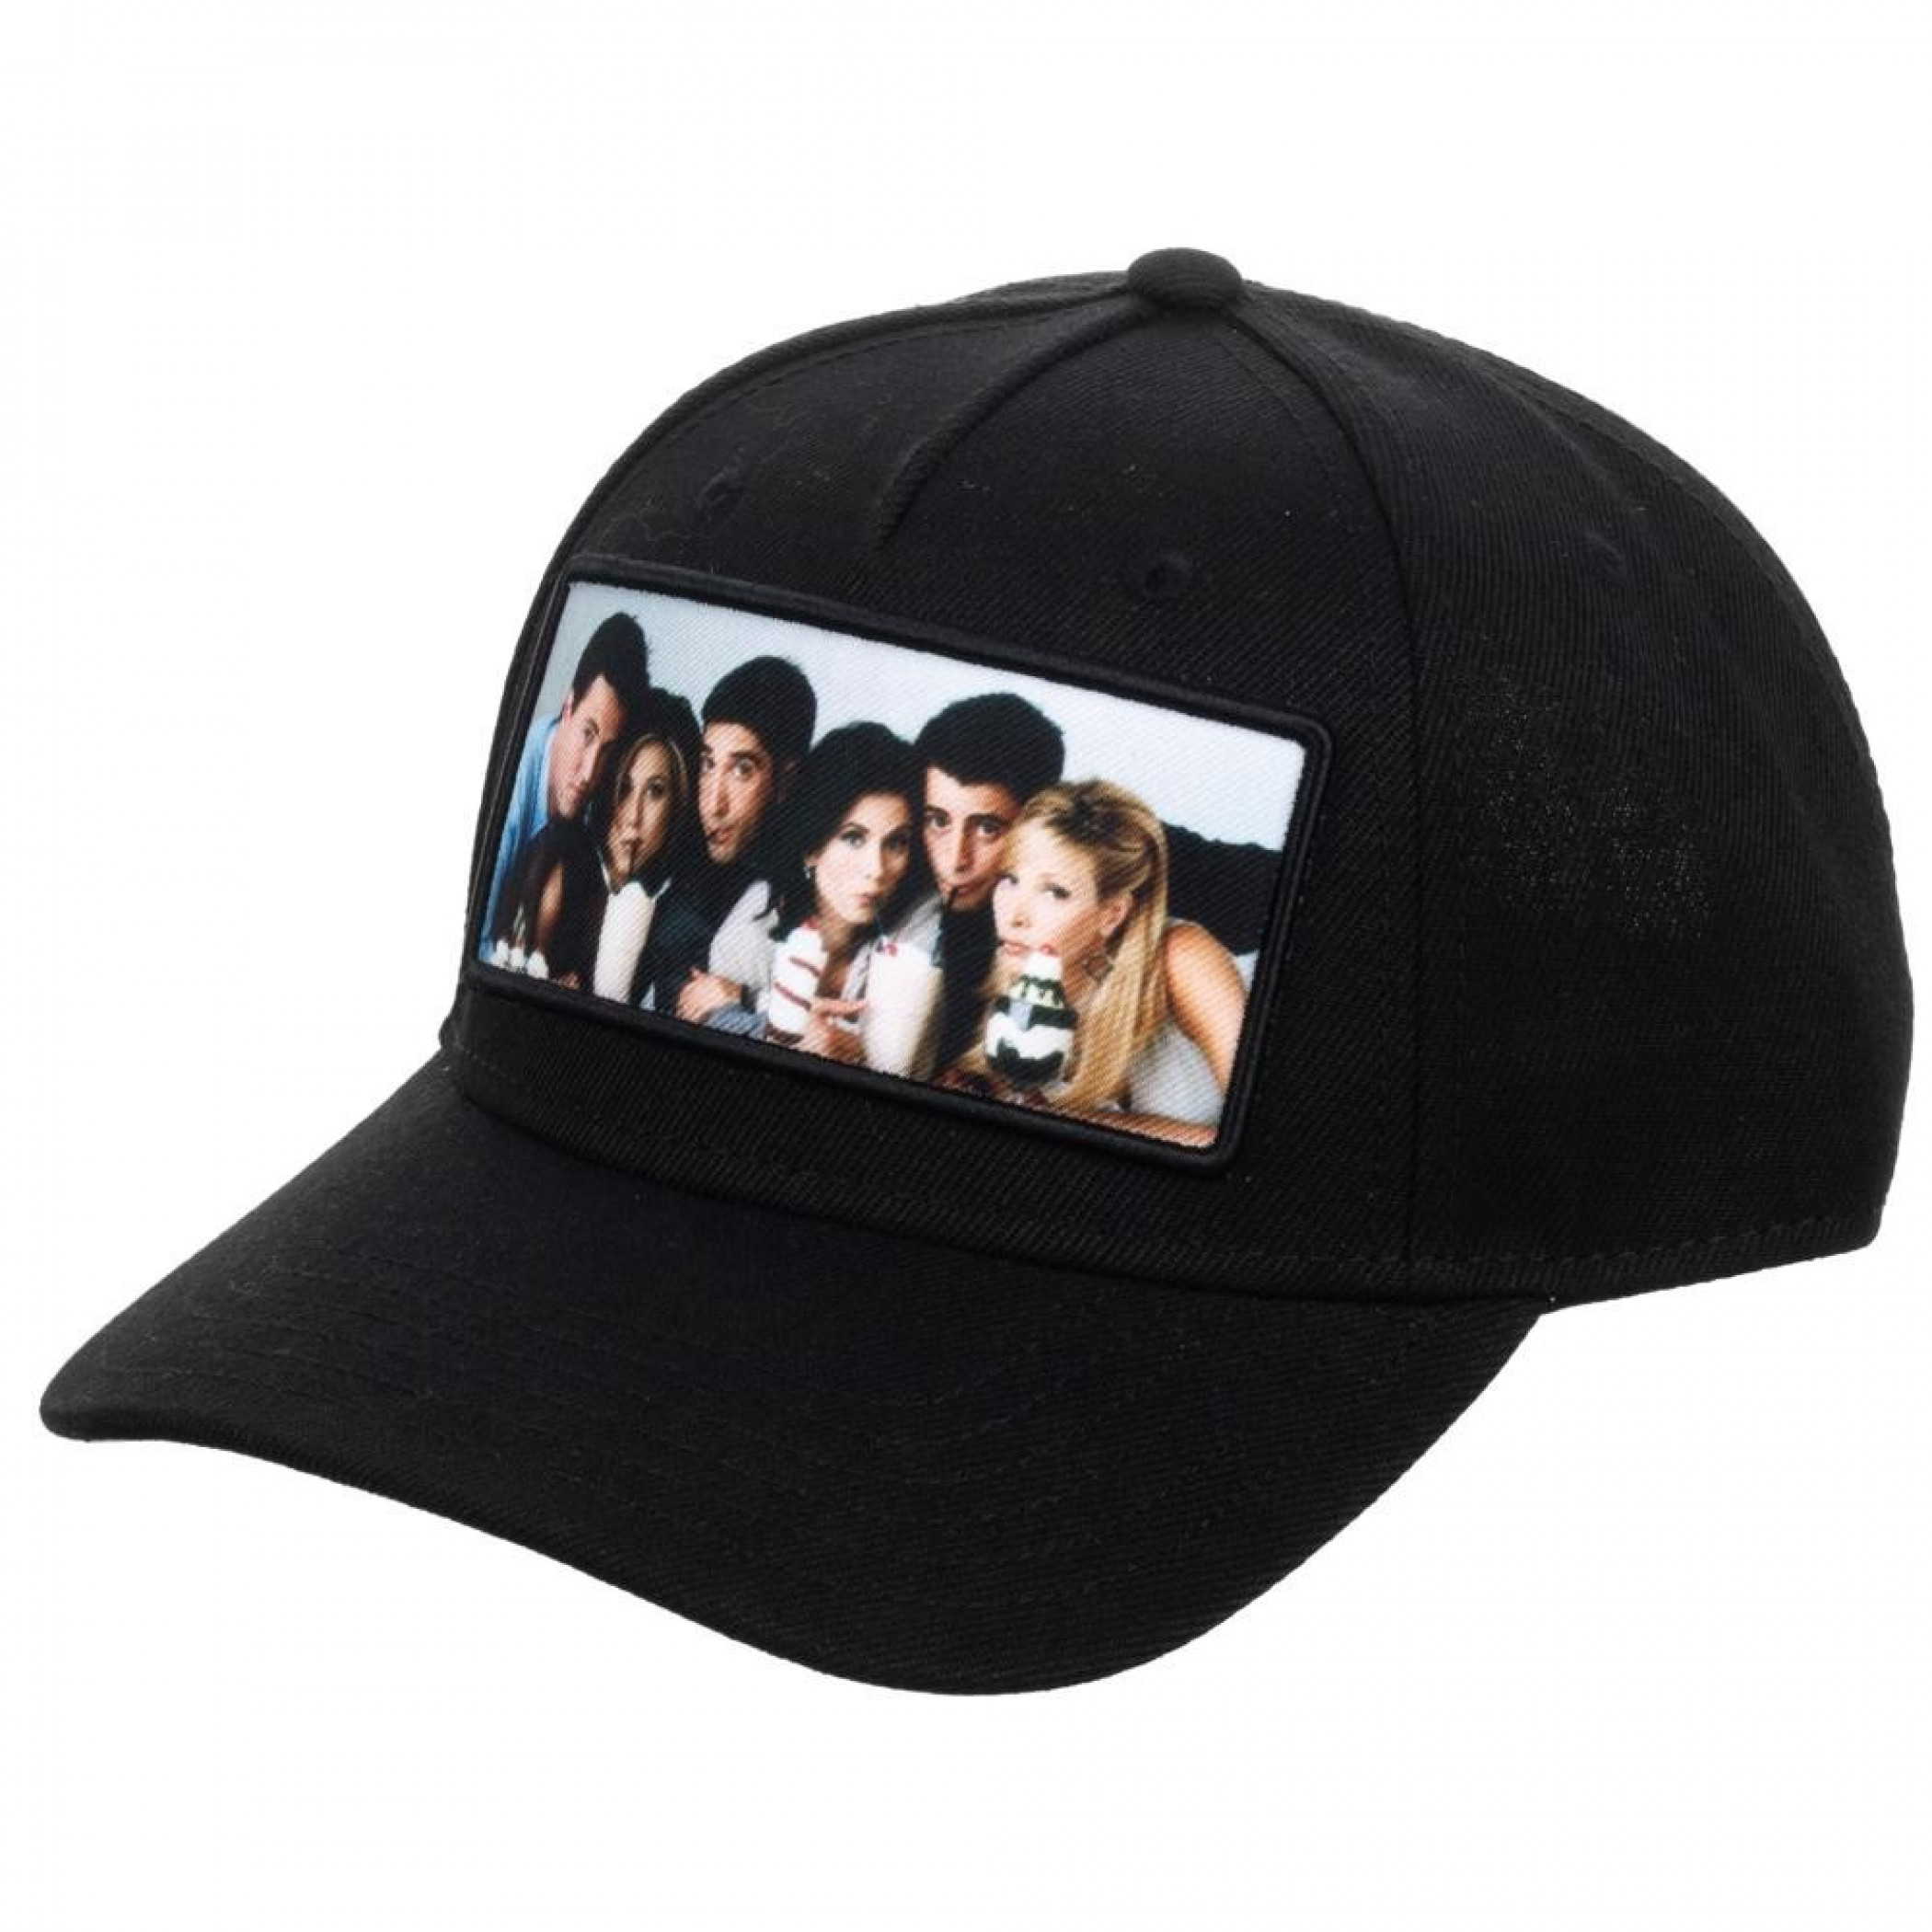 Friends TV Show Screen Grab Patch Adjustable Snapback Hat